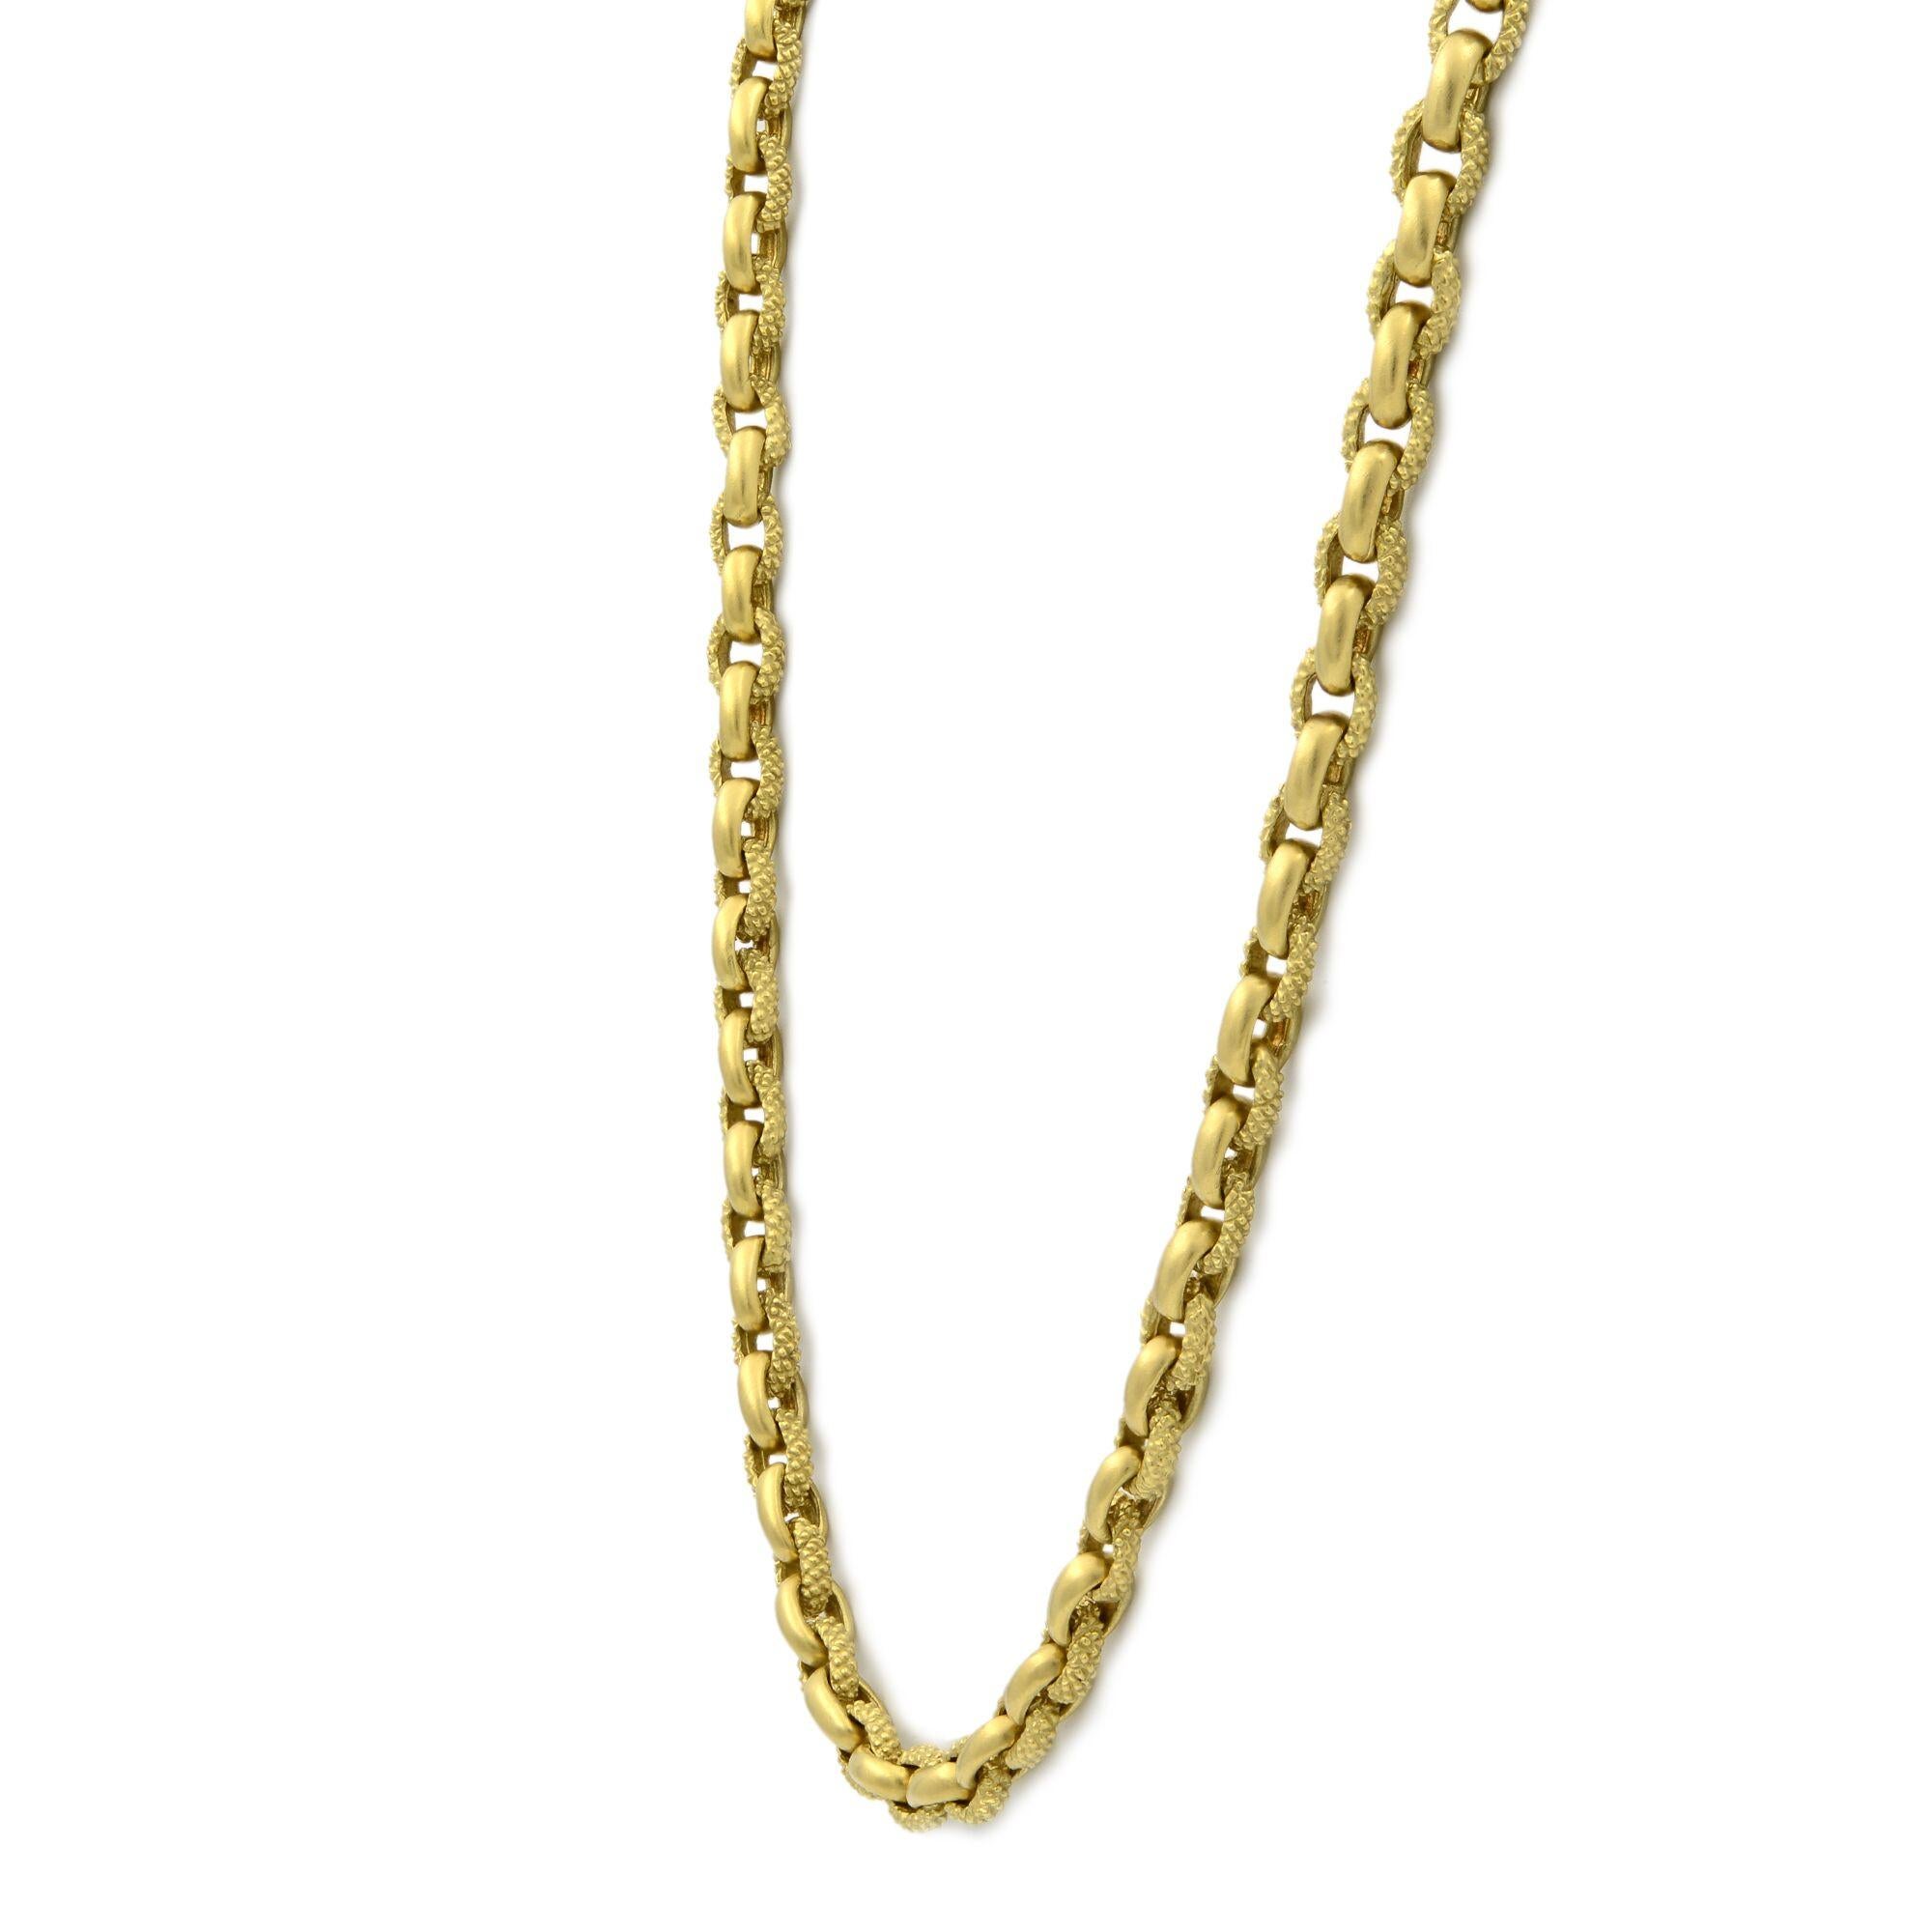 This is a diamond 18k yellow gold cable chain by Judith Ripka. The necklace's lobster lock is set with sparkling round cut diamonds and features little heart which is sets with 3 little diamonds. It chain measures 4 mm in width, 16 inch in length